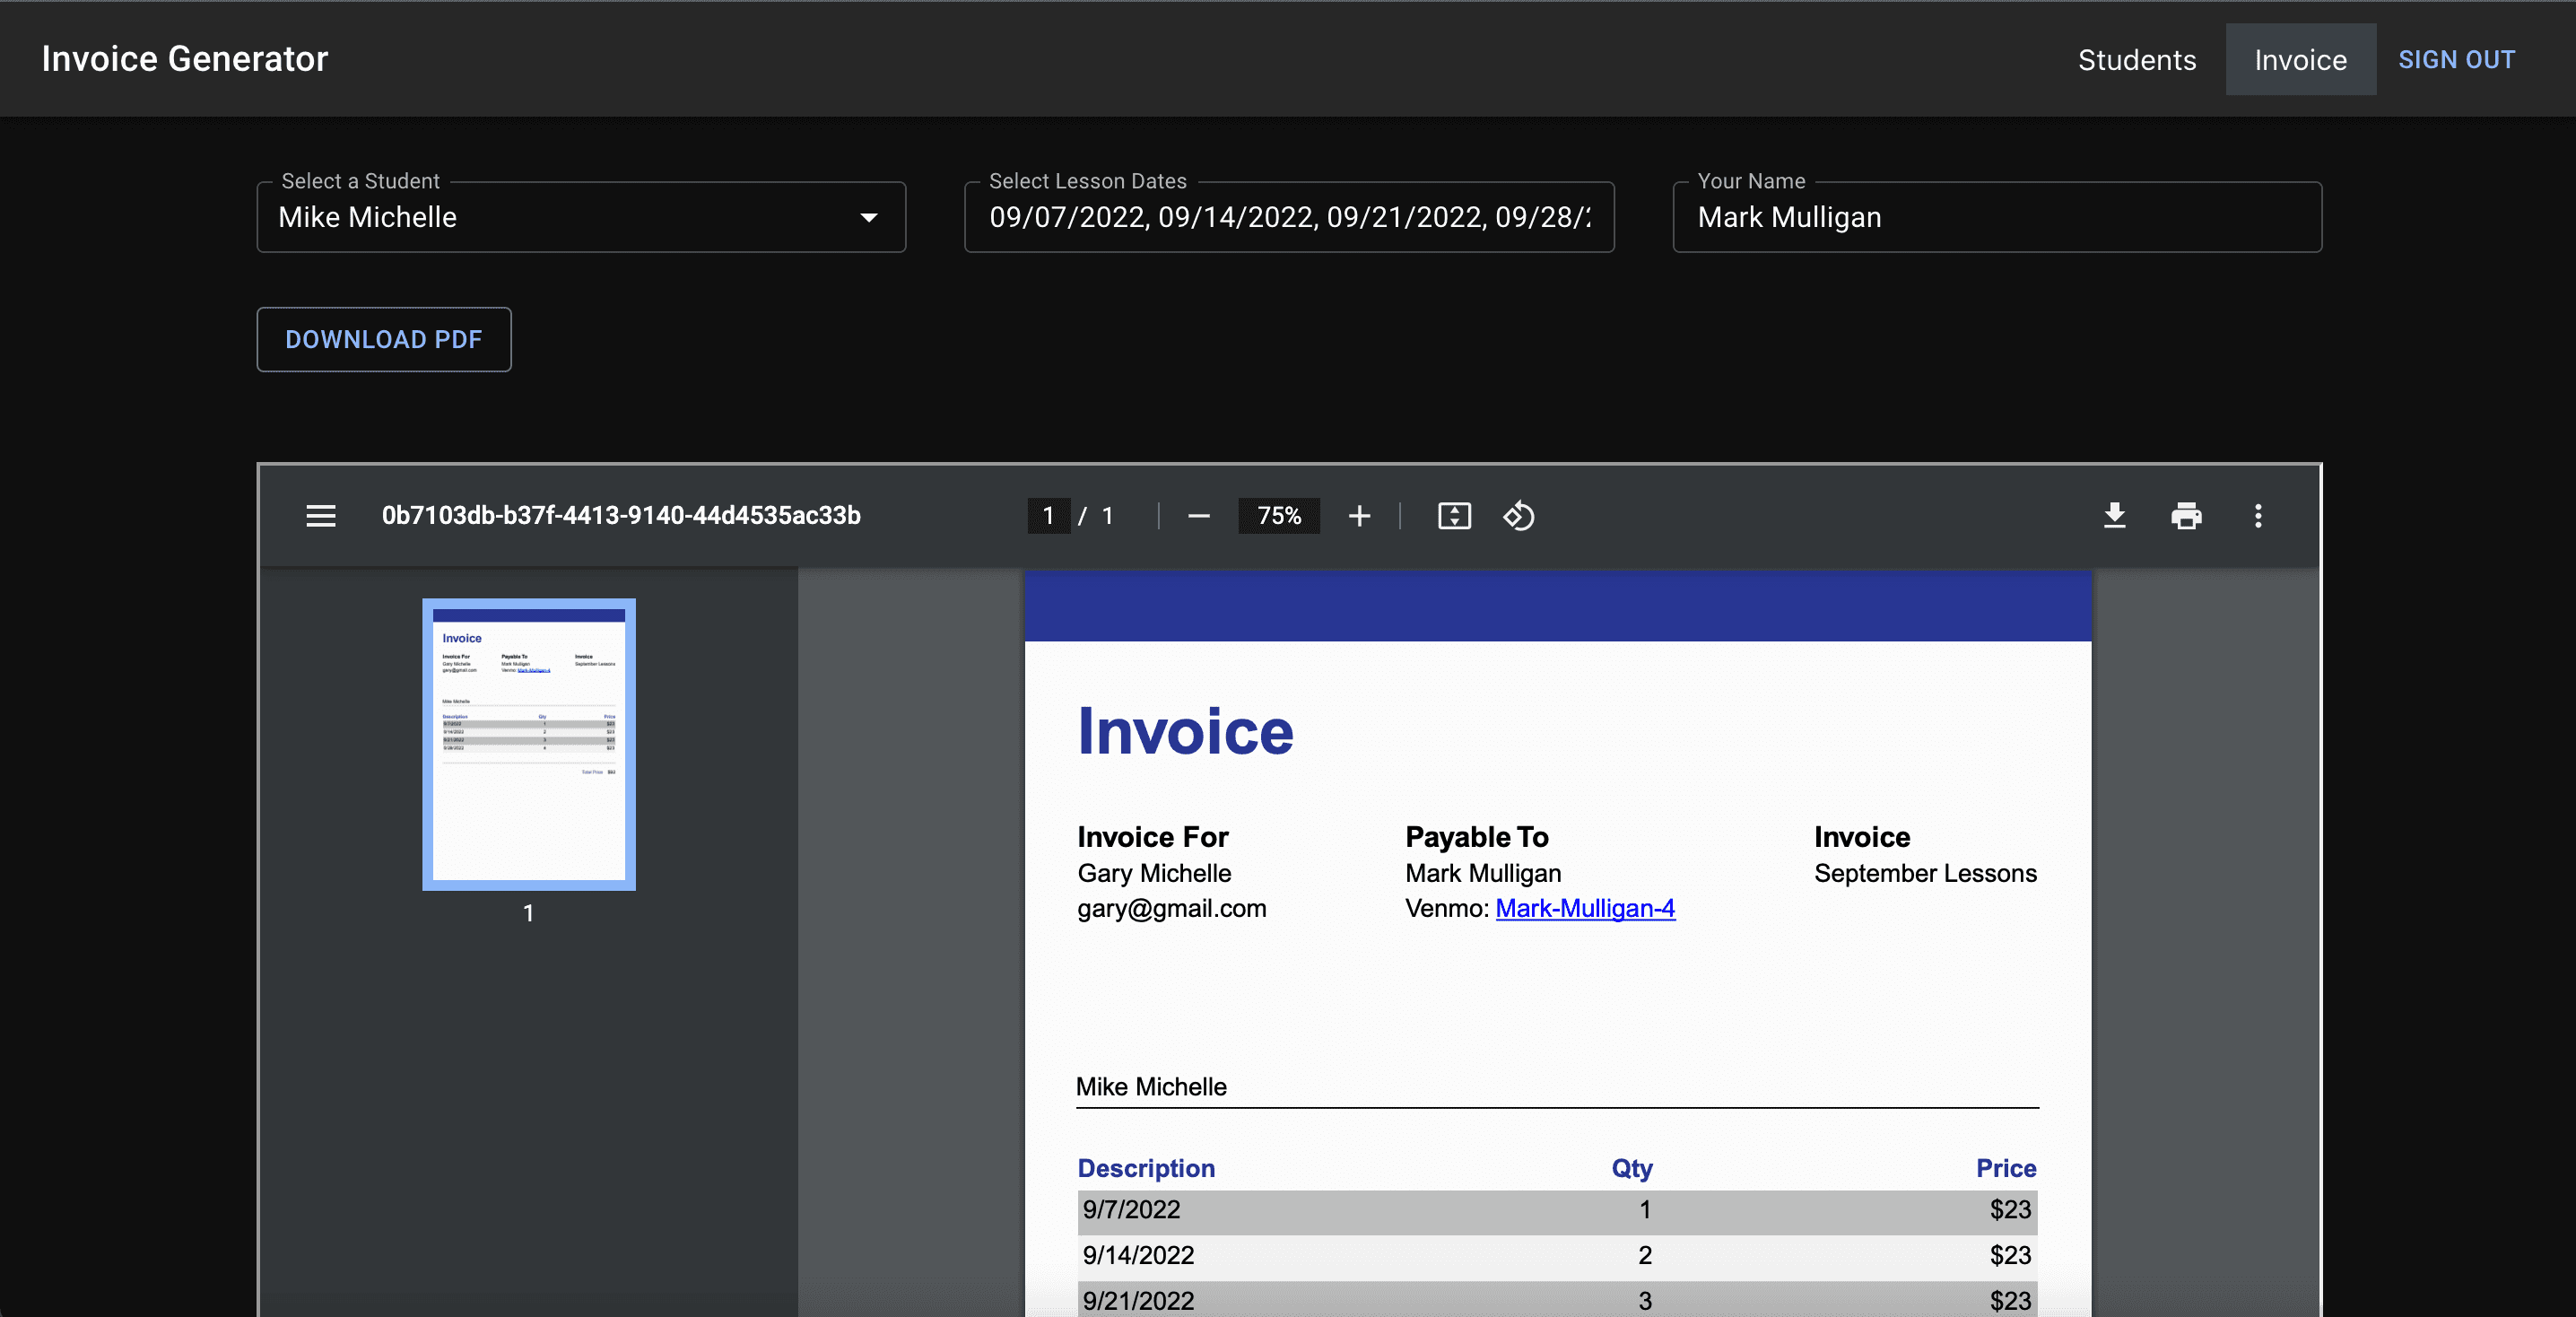 Invoice page of the invoice generator app